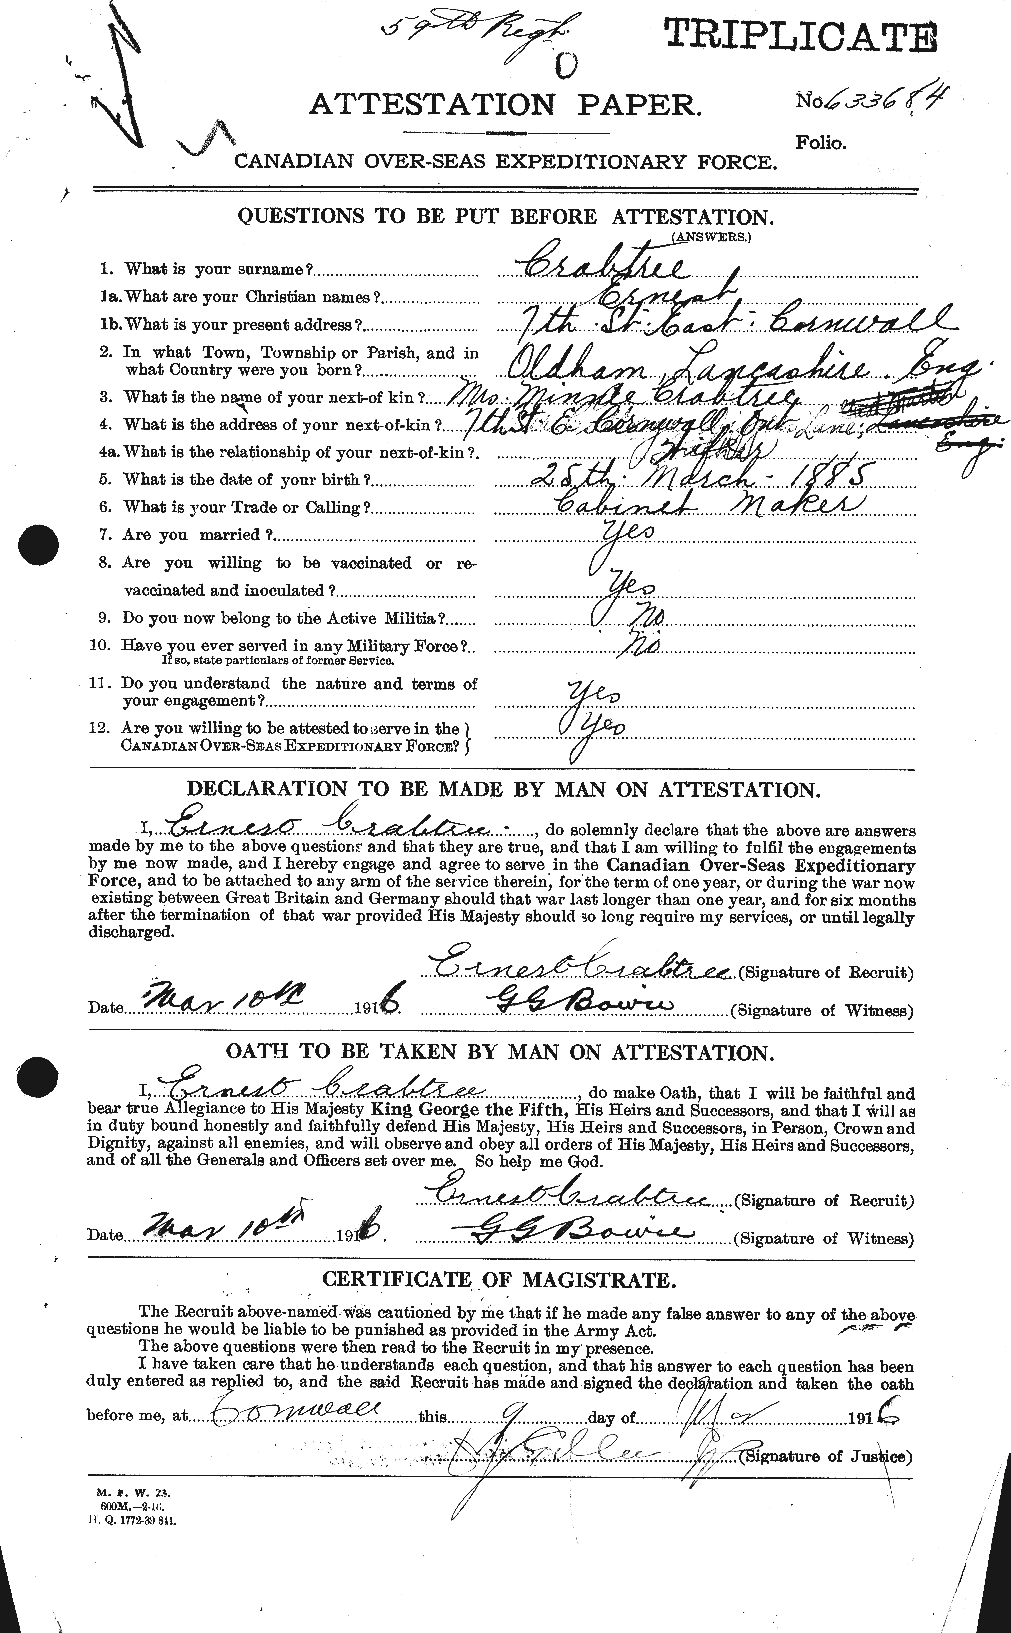 Personnel Records of the First World War - CEF 063332a